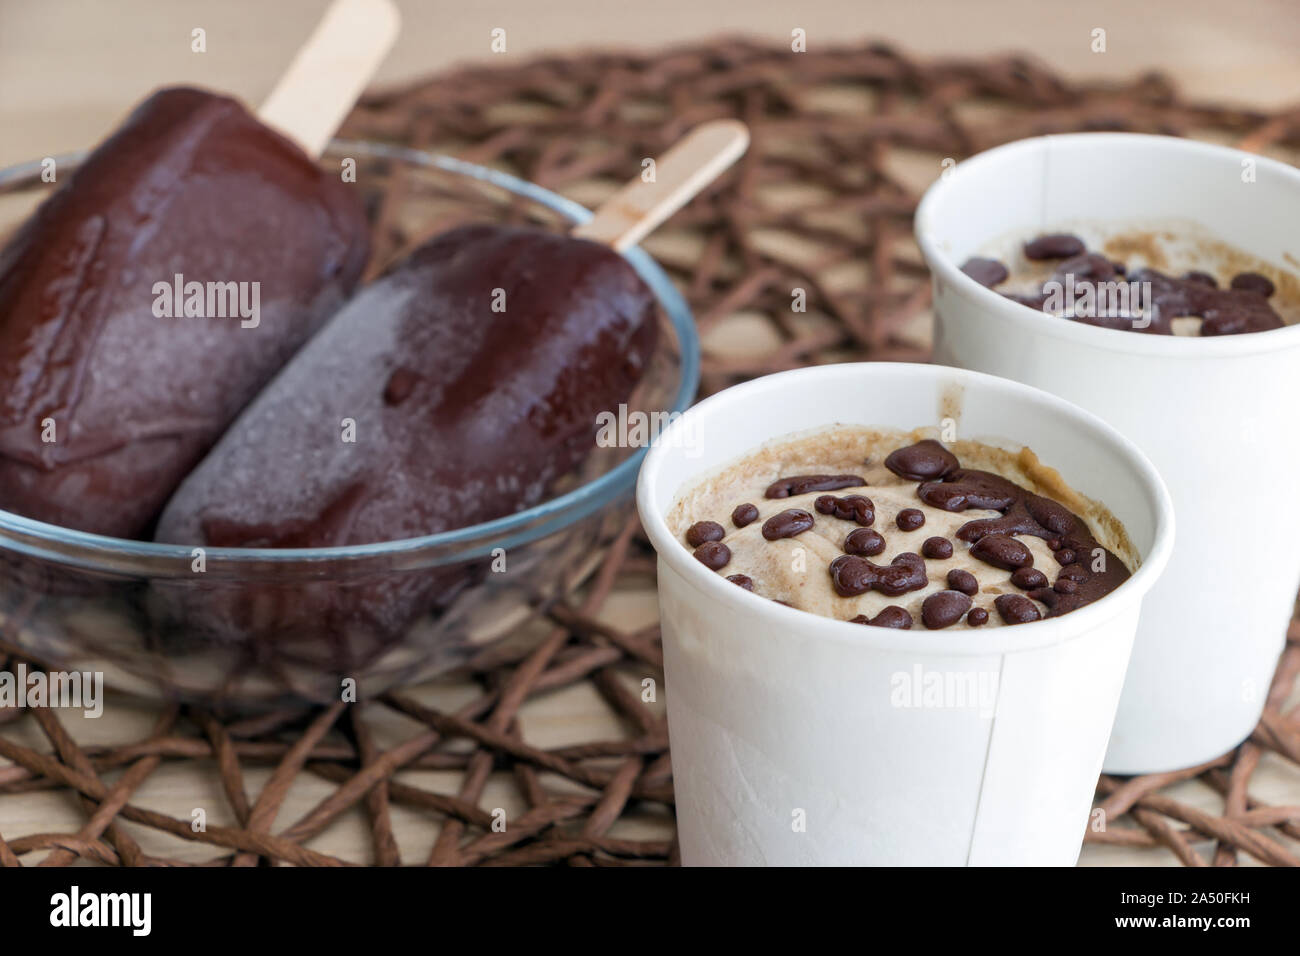 Raw banana ice cream with coconut cream, coated with natural chocolate, in a white paper cup, and chocolate popsicles on sticks in glass bowl. Healthy Stock Photo